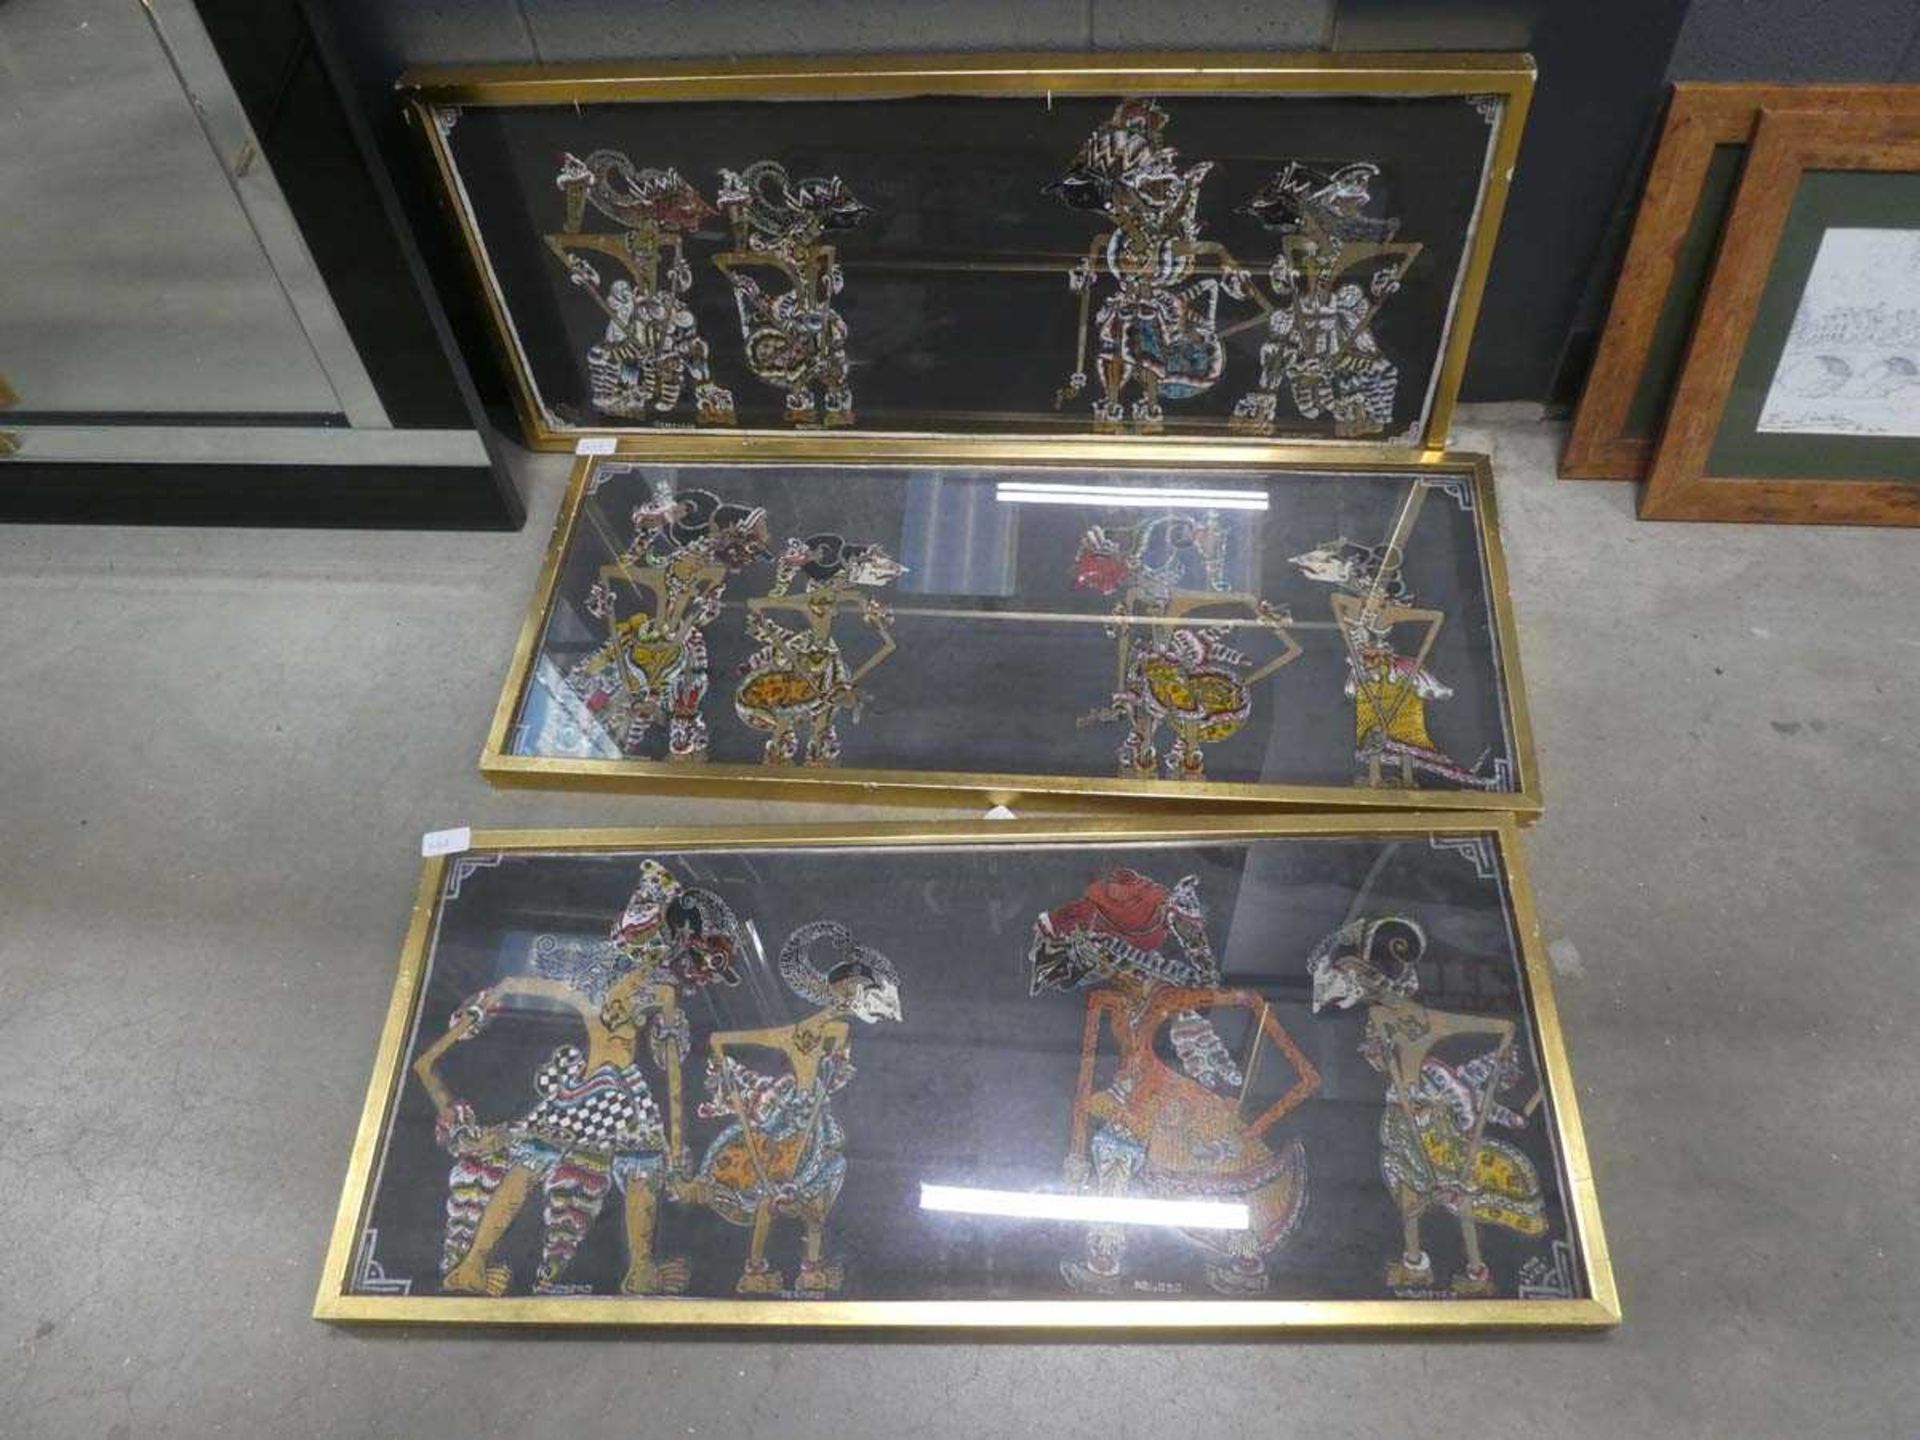 3 Balinese paintings on canvas: theatre puppets